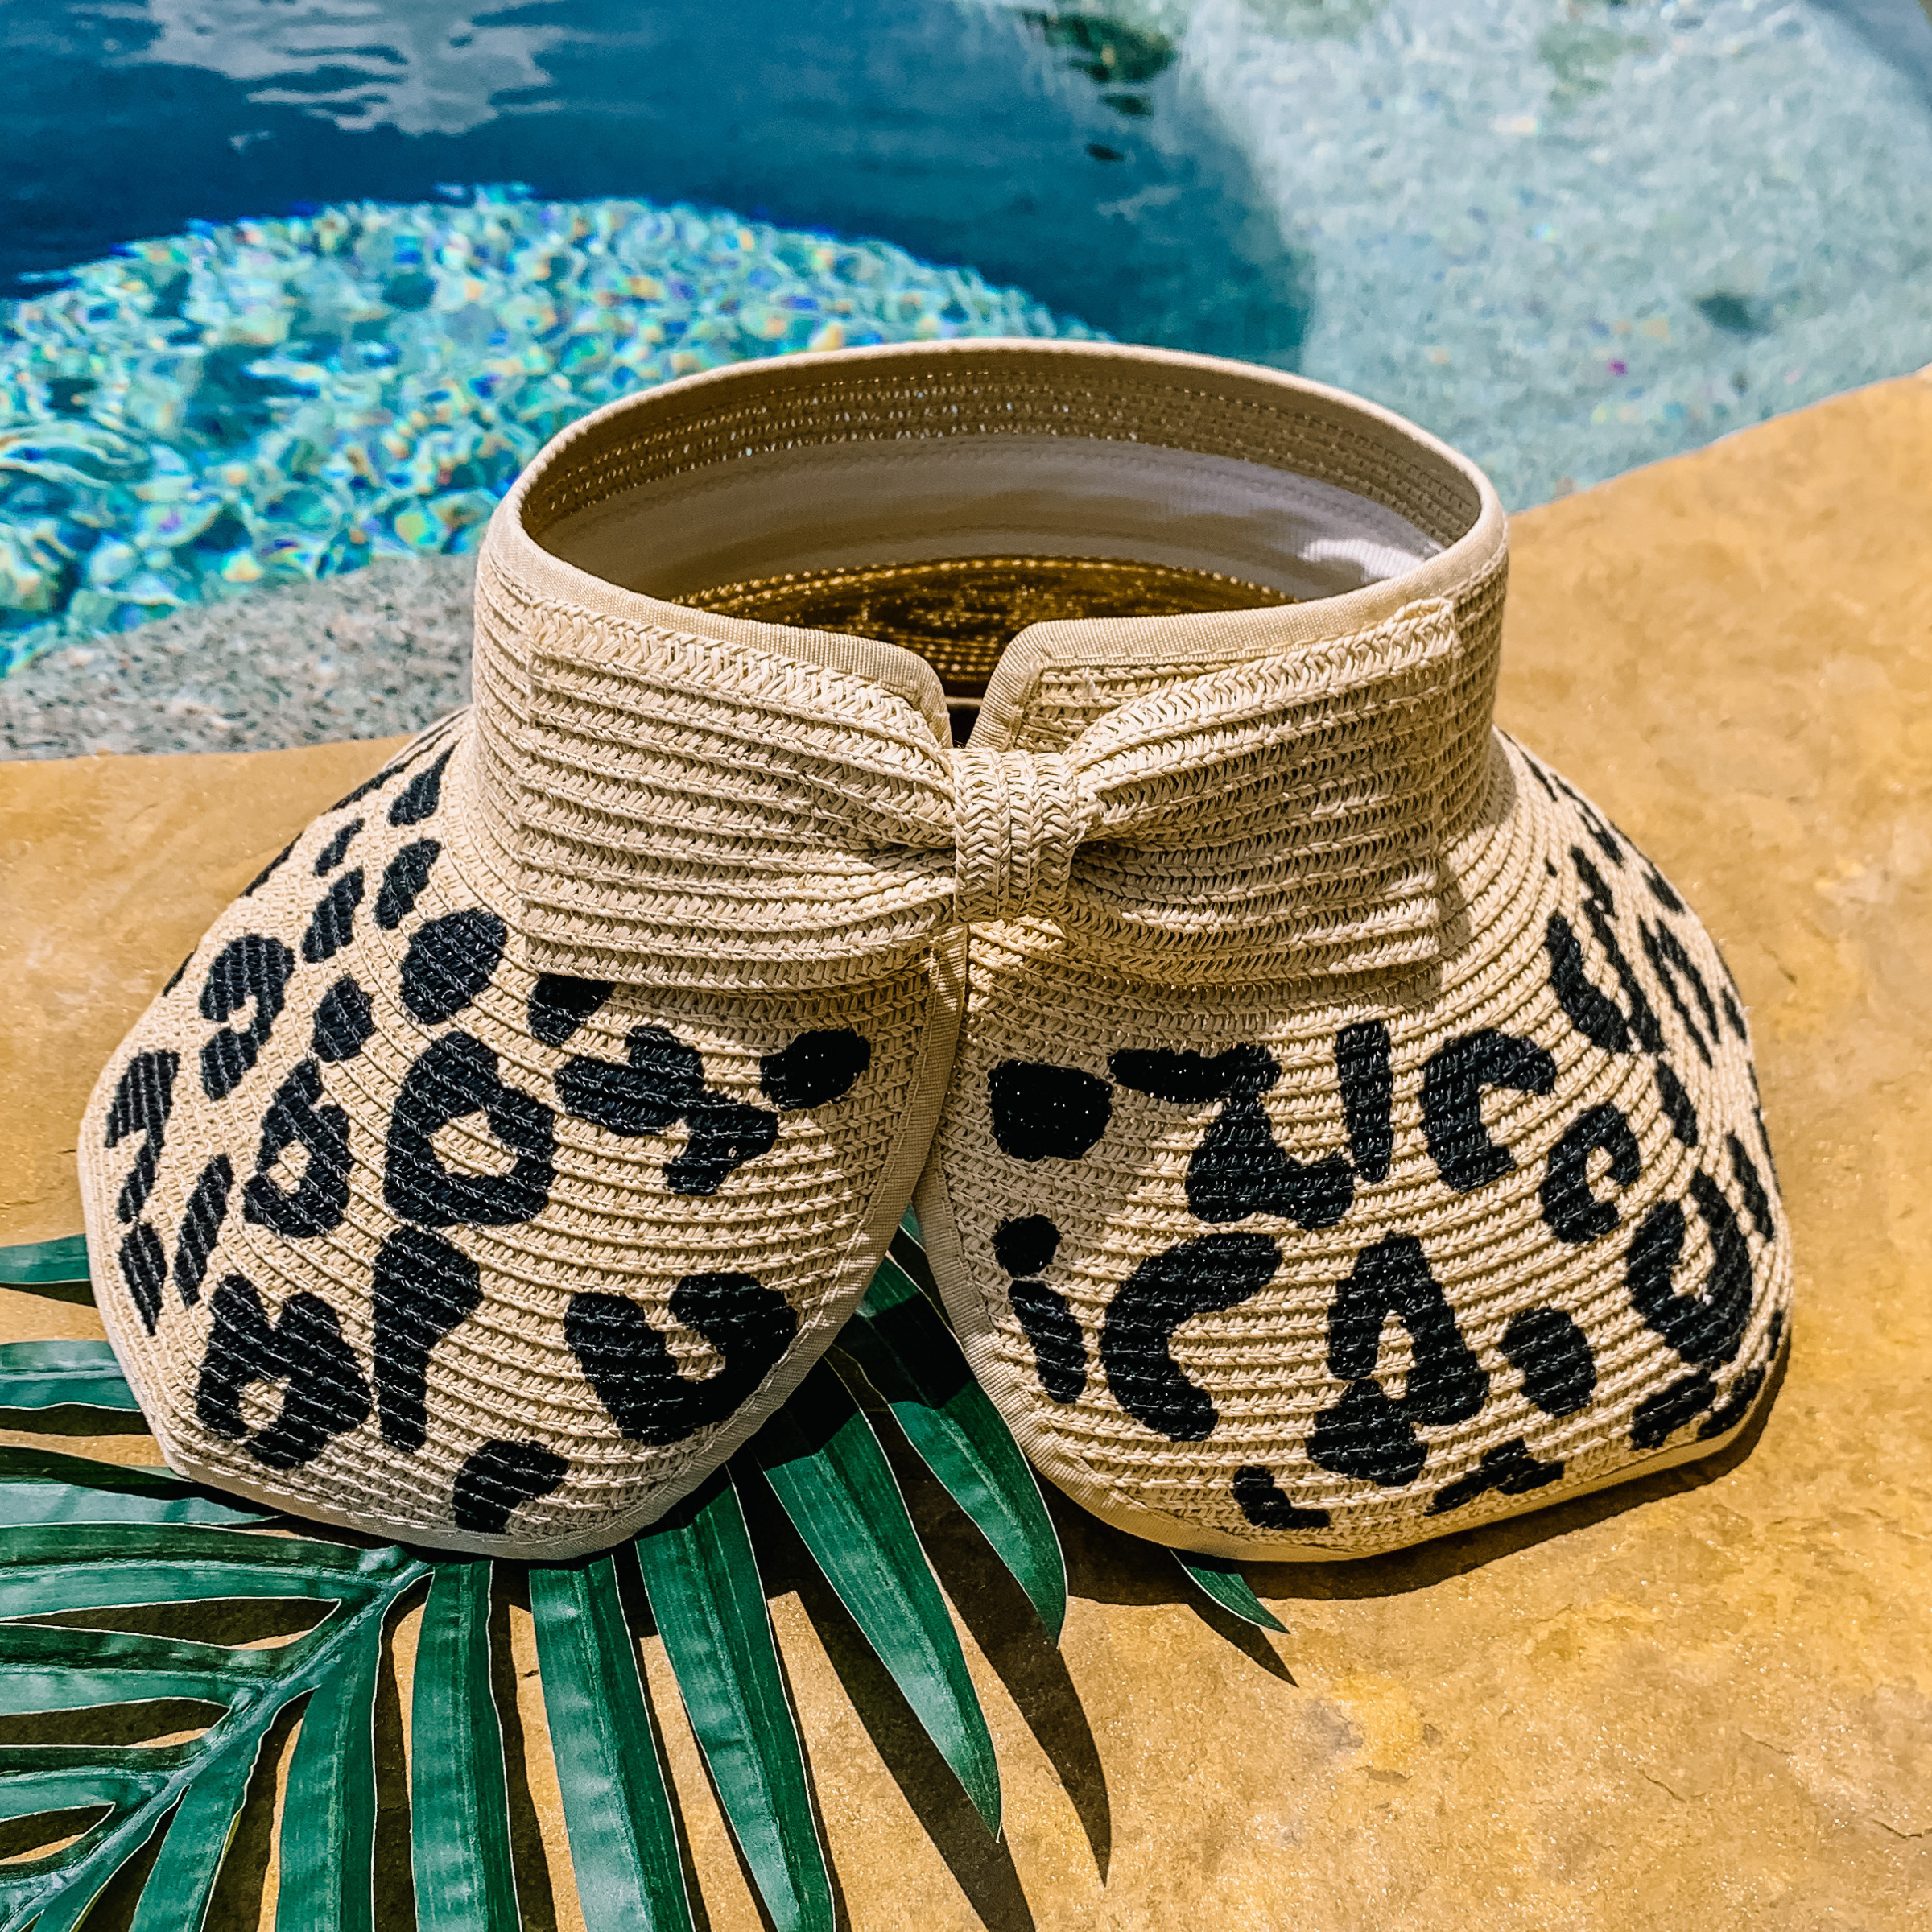 Poolside Chic Velcro Sun Visor in Light Tan with Leopard Print - Giddy Up Glamour Boutique